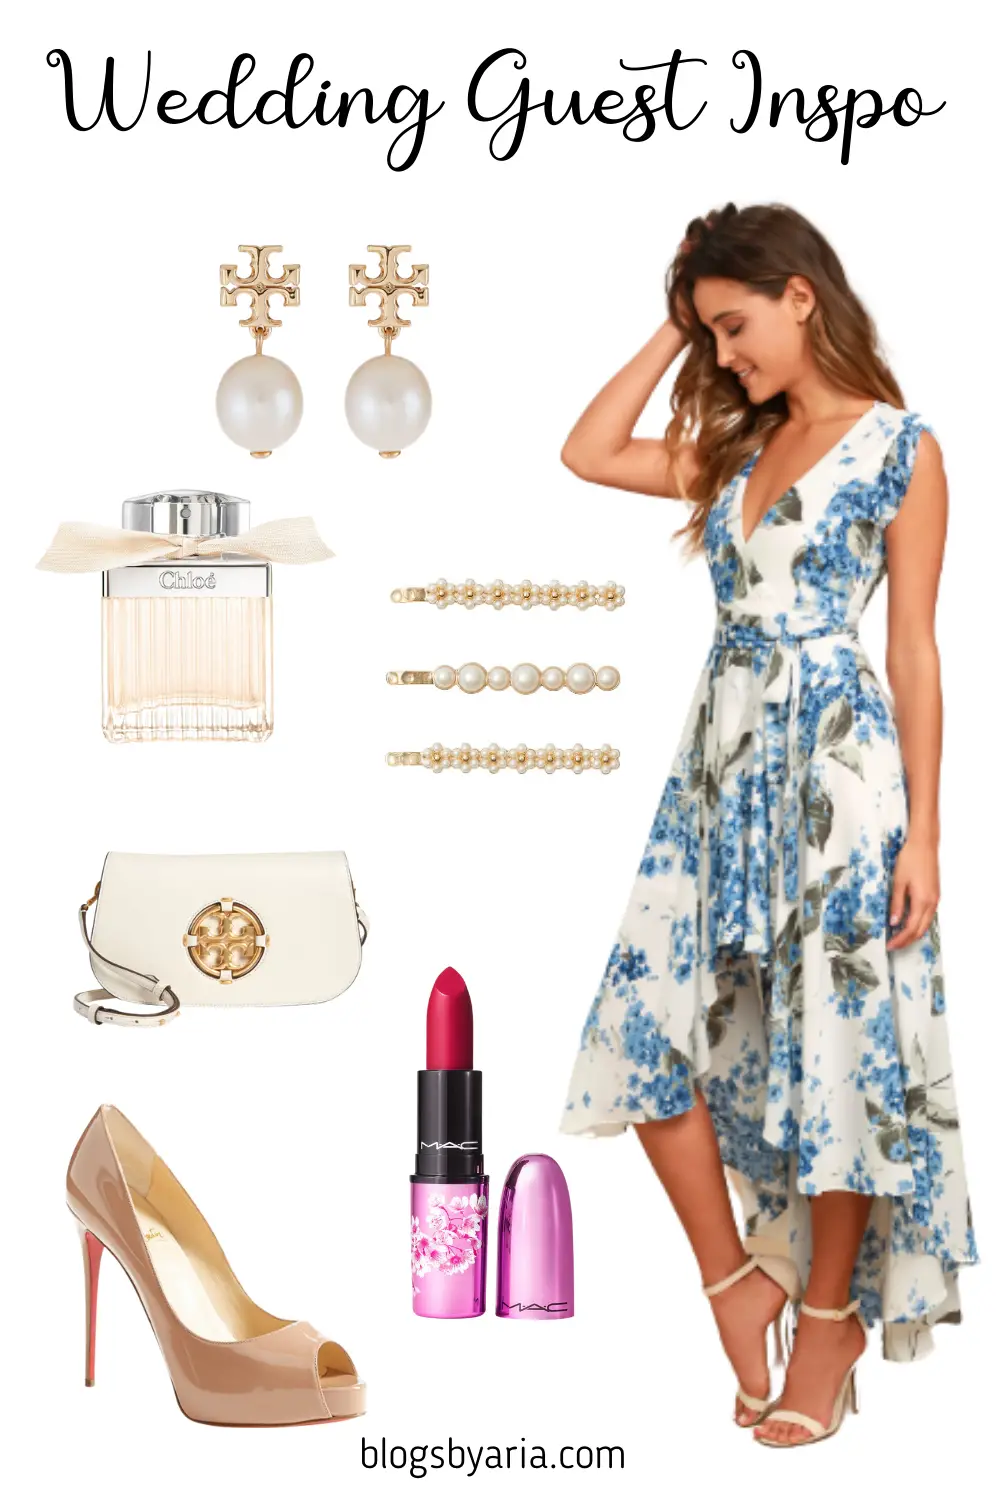 Wedding Guest Outfit Inspiration - Blogs by Aria